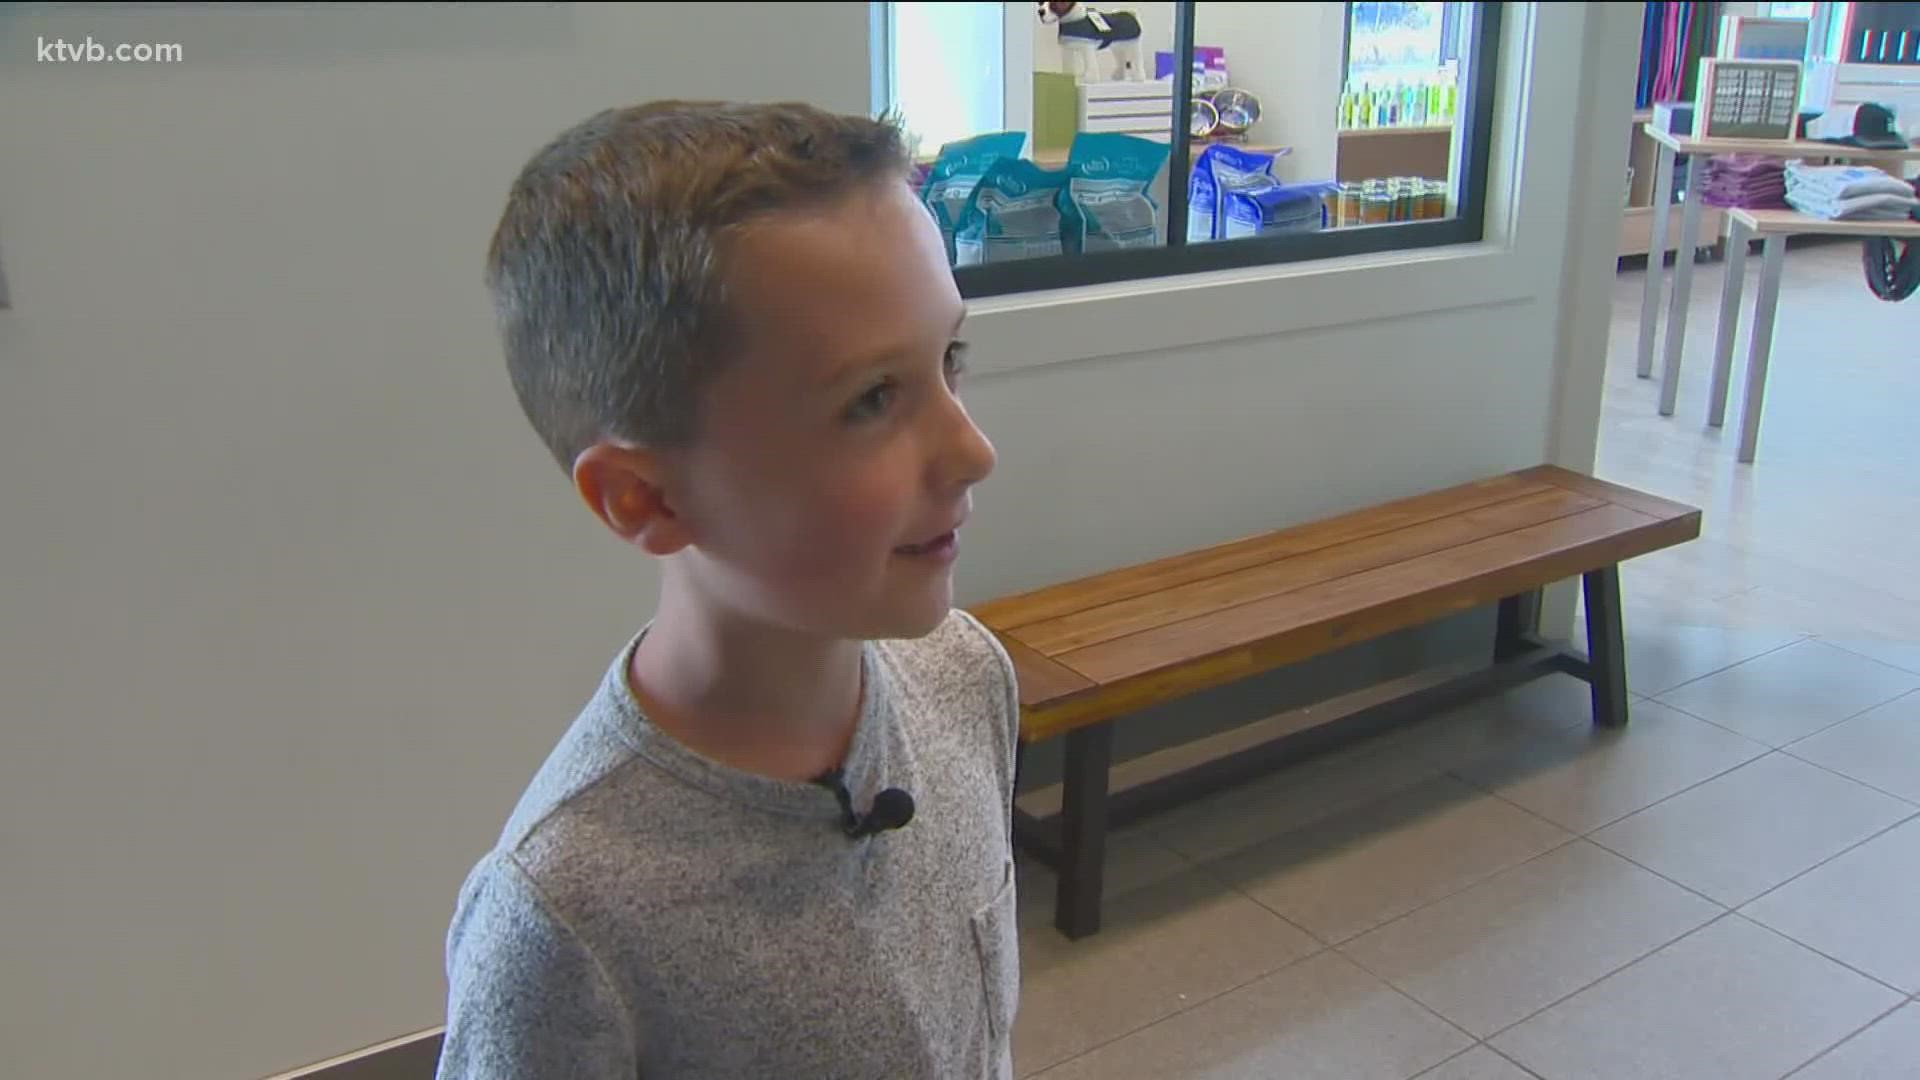 9-year-old Ben Miller loves animals, and he has raised a lot of money for IHS with his lemonade stand over the last couple of years. He says it just feels good.